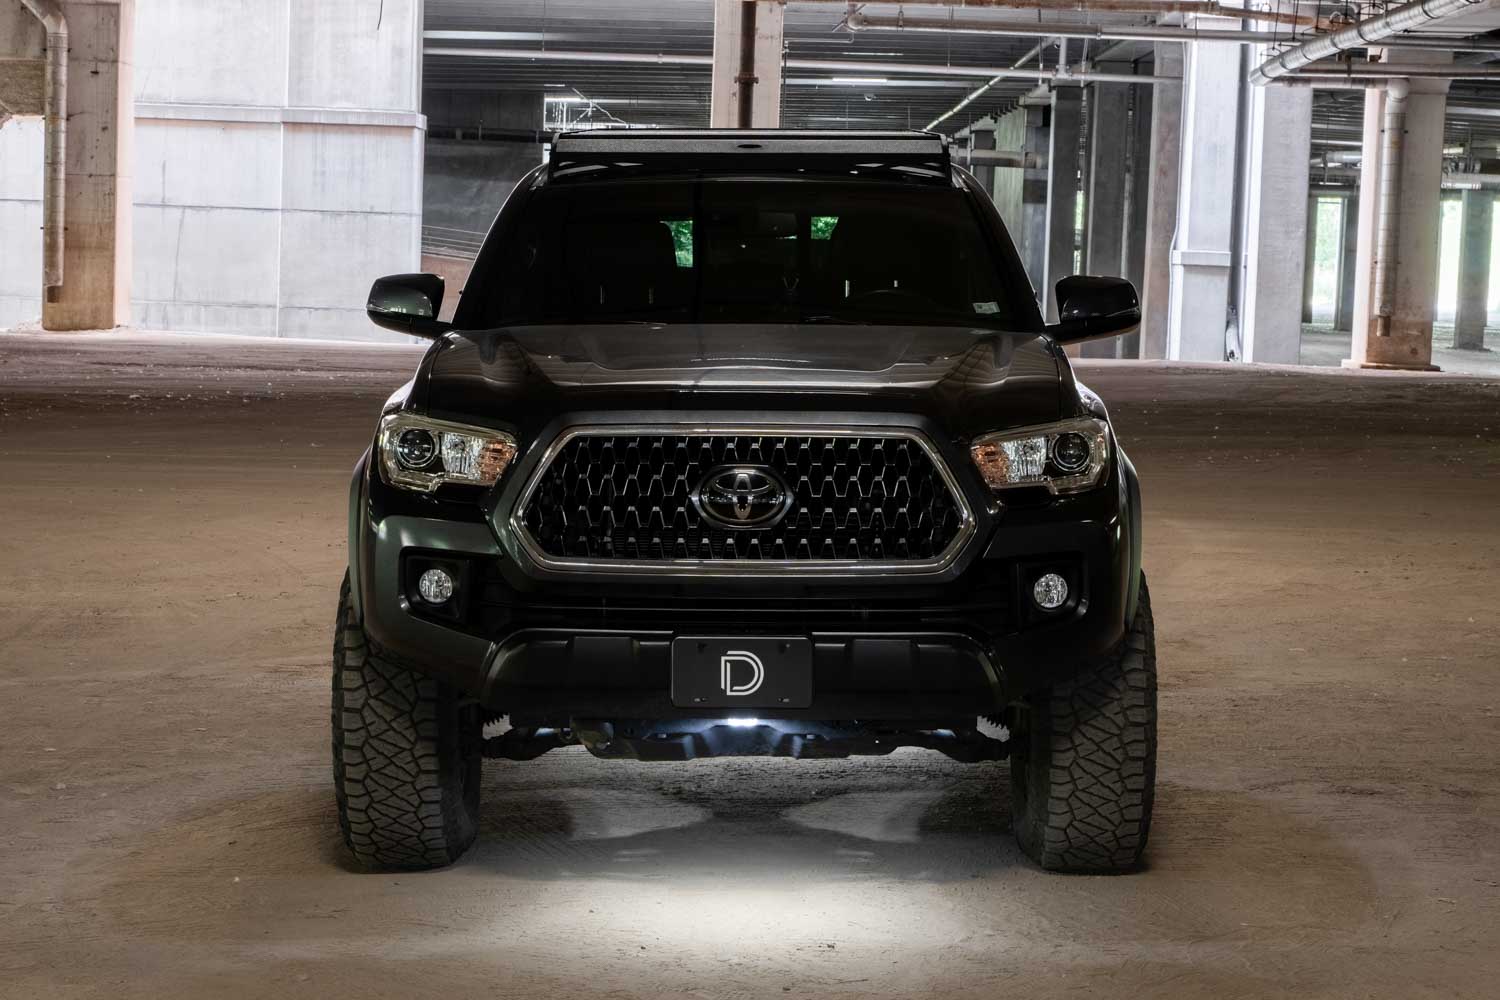 Stage Series LED Rock Lights for Trucks on a Toyota Tacoma in low power mode